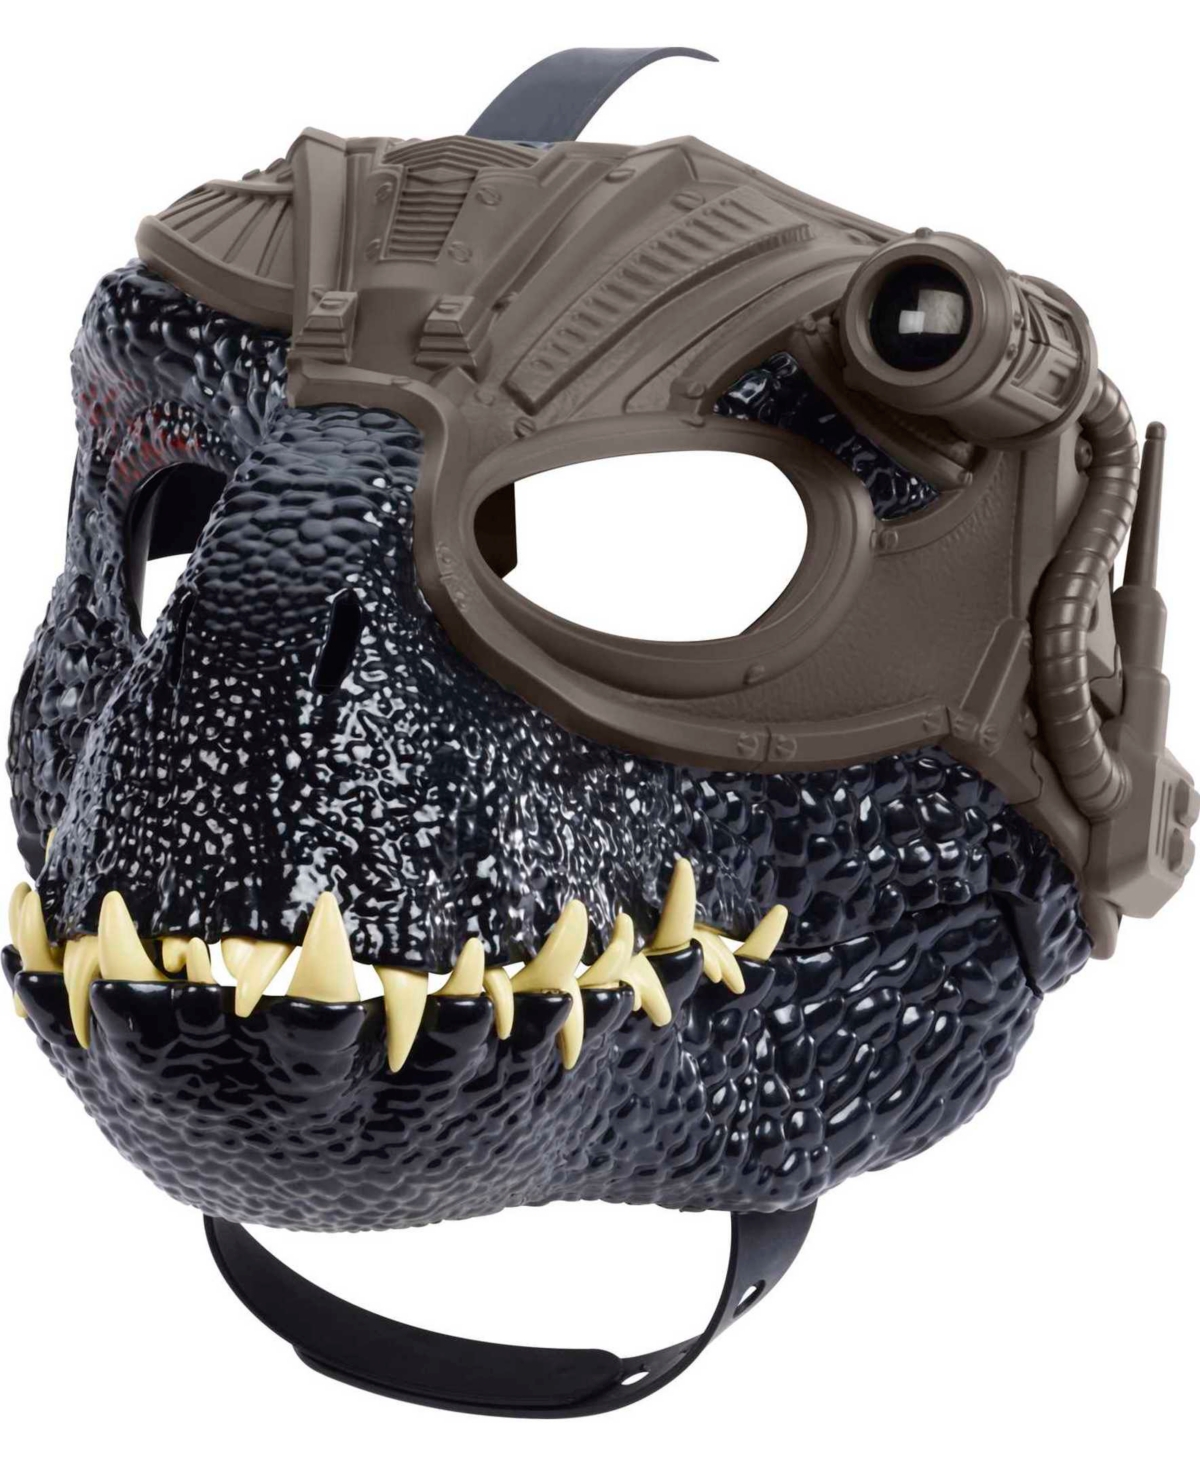 Jurassic World Kids' Indoraptor Dinosaur Mask With Tracking Light And Sound For Role Play In Multi-color